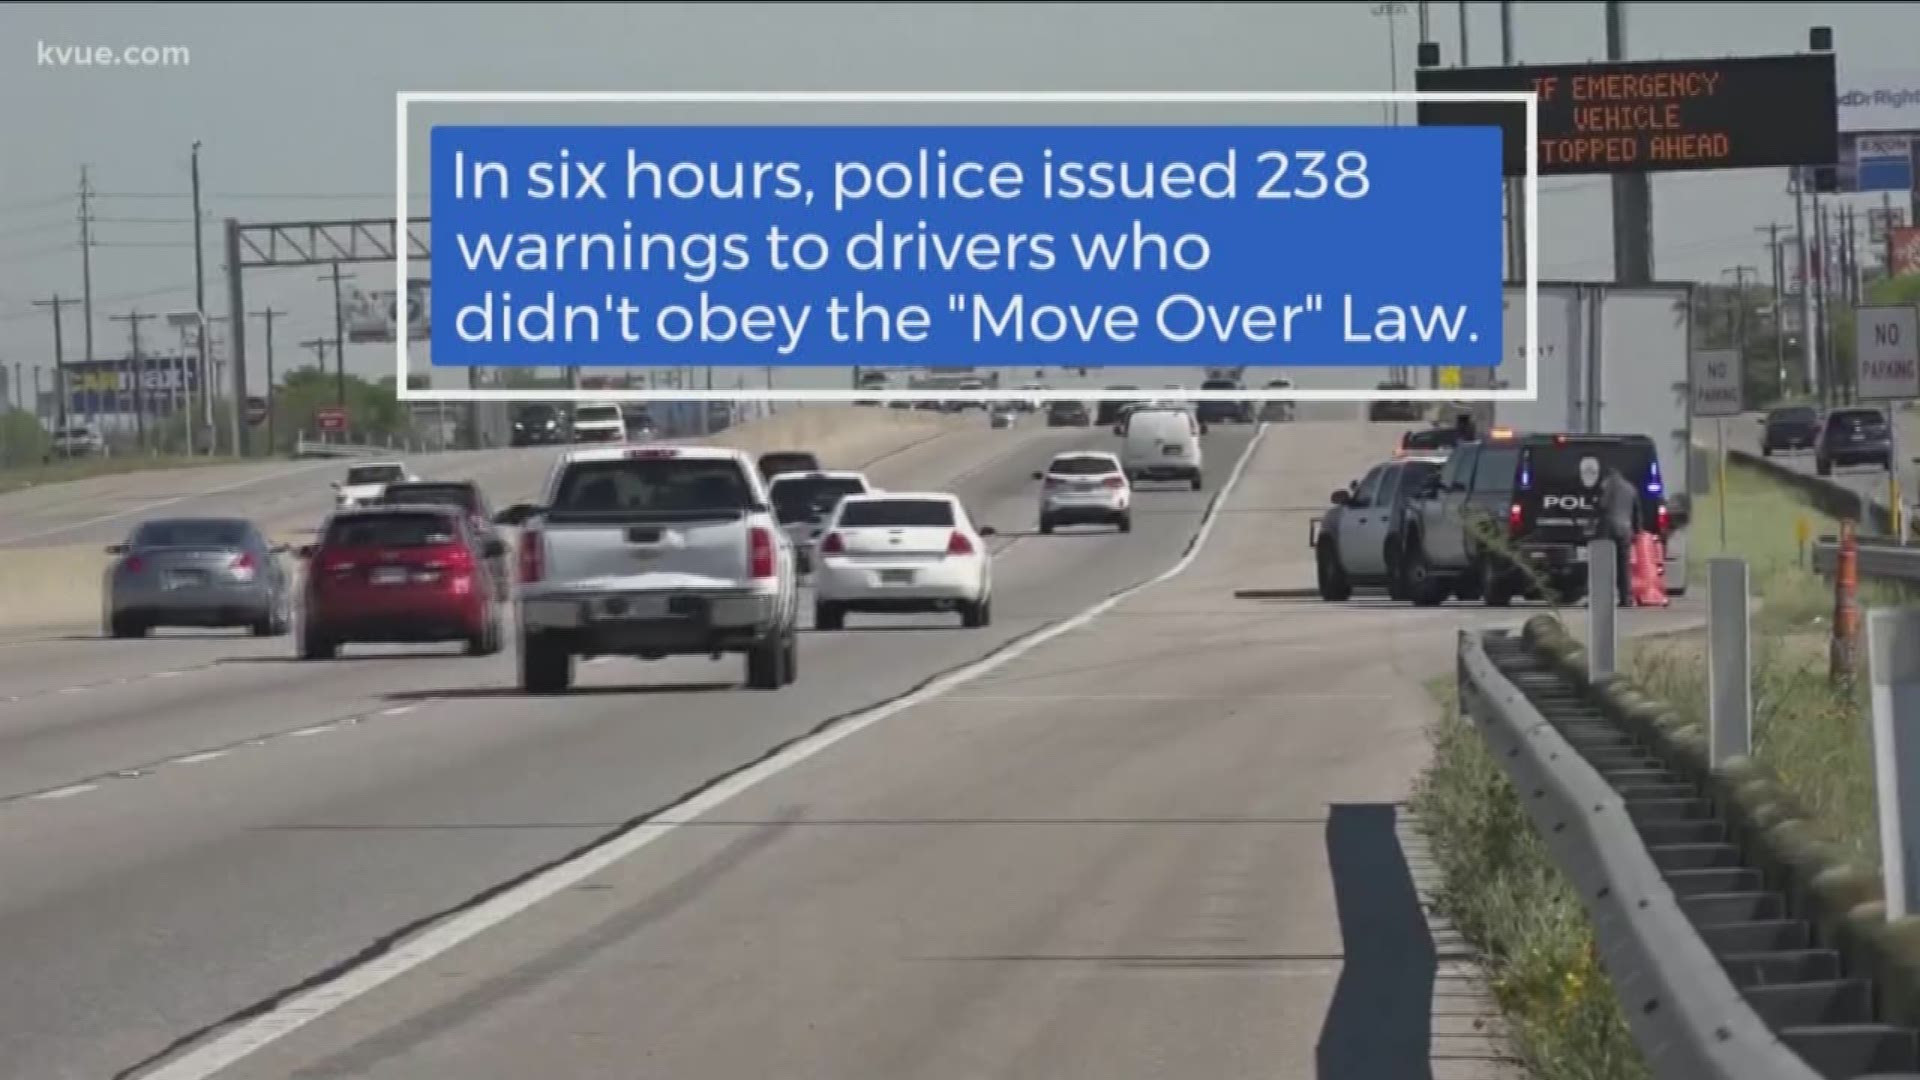 In just six hours, police issued 238 warnings to drivers who didn't obey the Move Over Law.